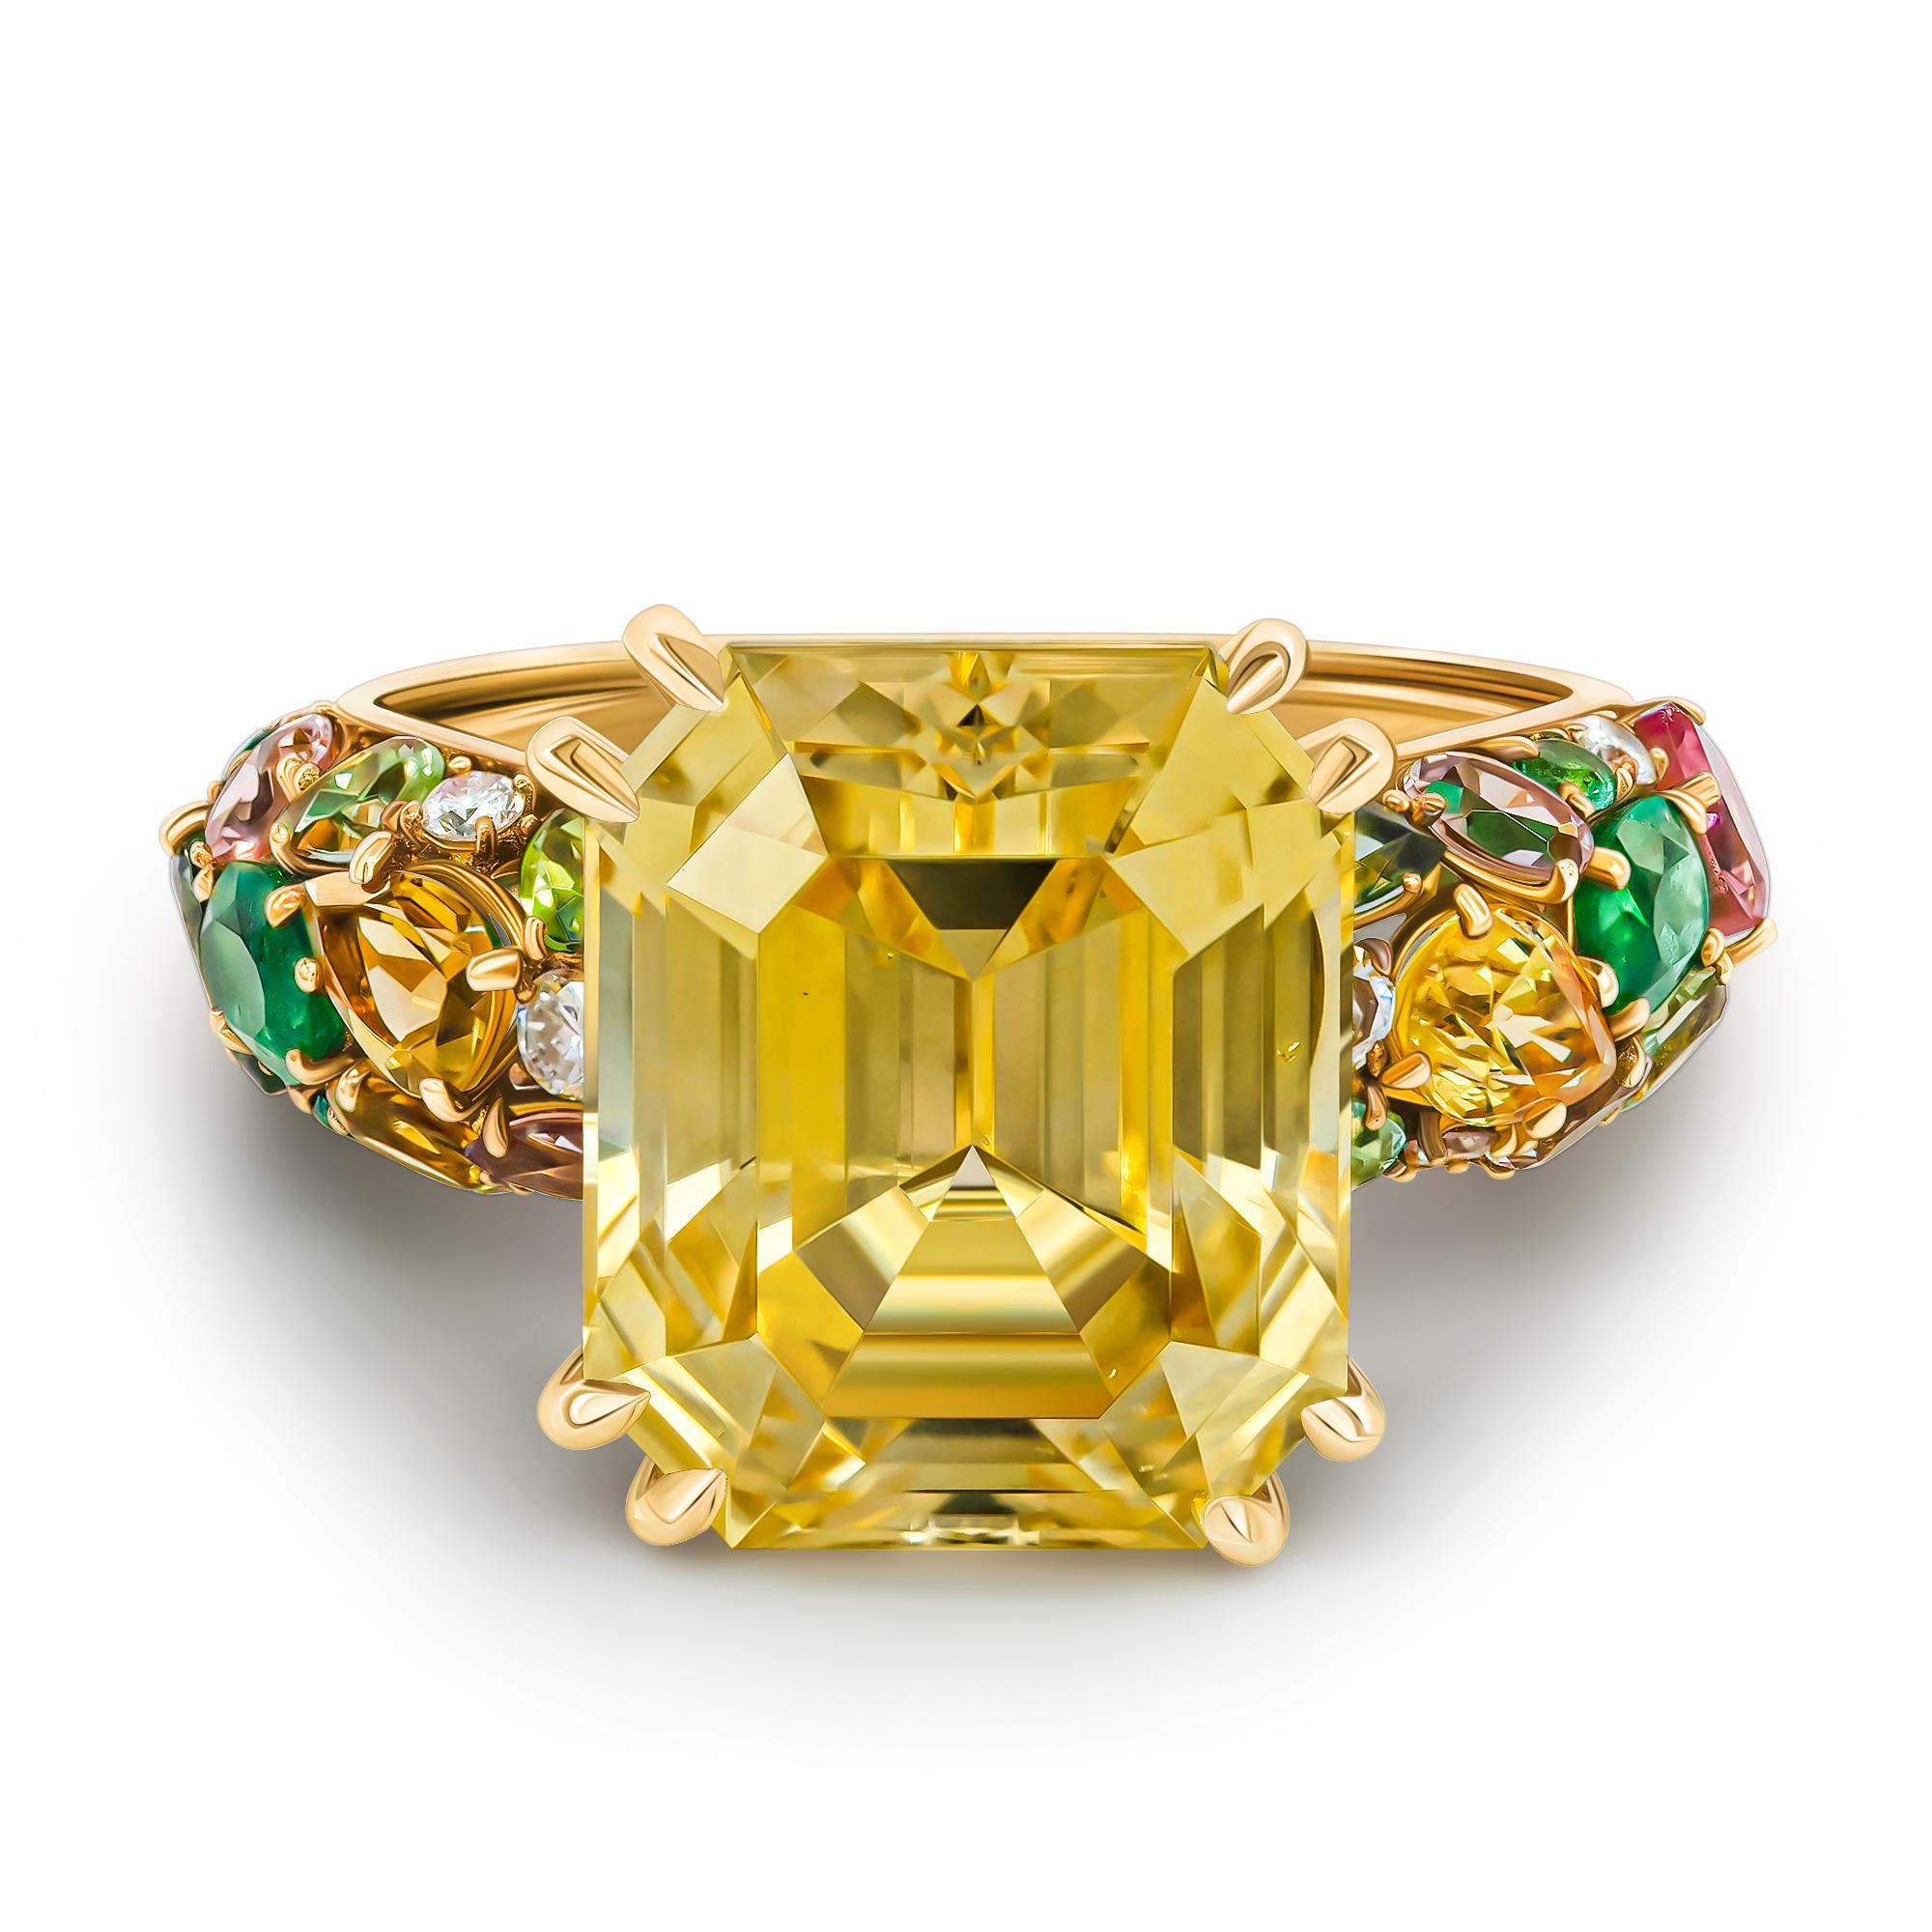 •	18K Rose gold.  
•	Unheated yellow Sapphire in emerald cut – total carat weight 6.93.
•	Mixed gemstones in different cut – total carat weight 1.69.
•	Product weight – 6.17 grams.
•	Ring size – 6’.
